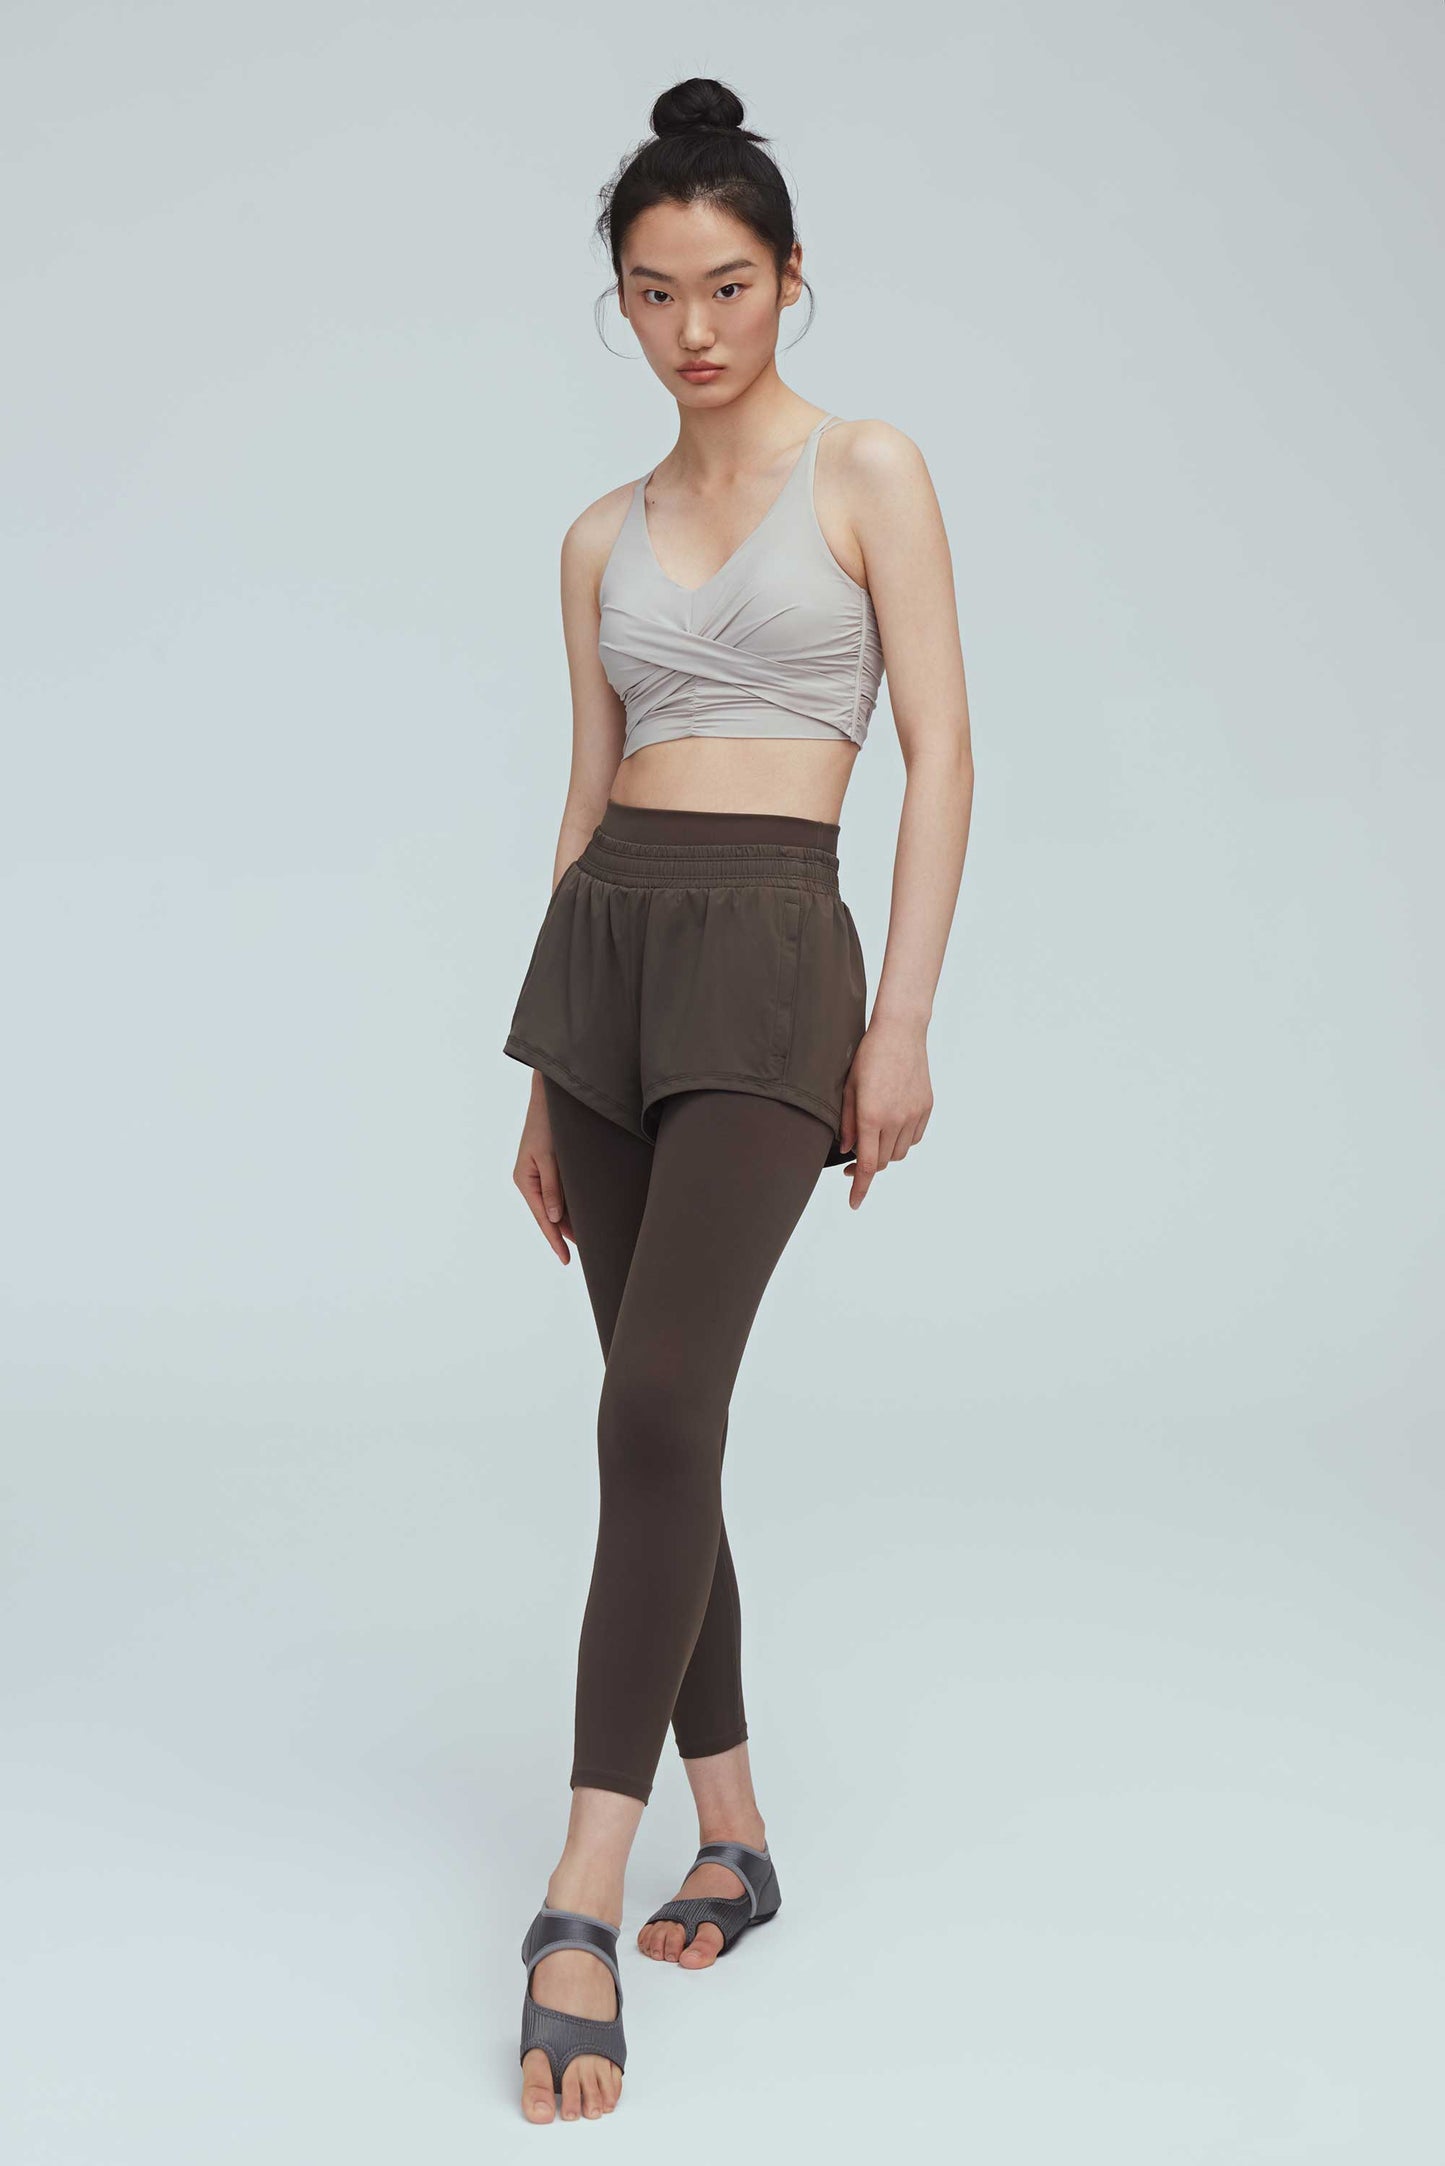 full body front view of a woman wearing a light grey color v-neck sports bra with ruched details and a pair of black leggings layered with black shorts